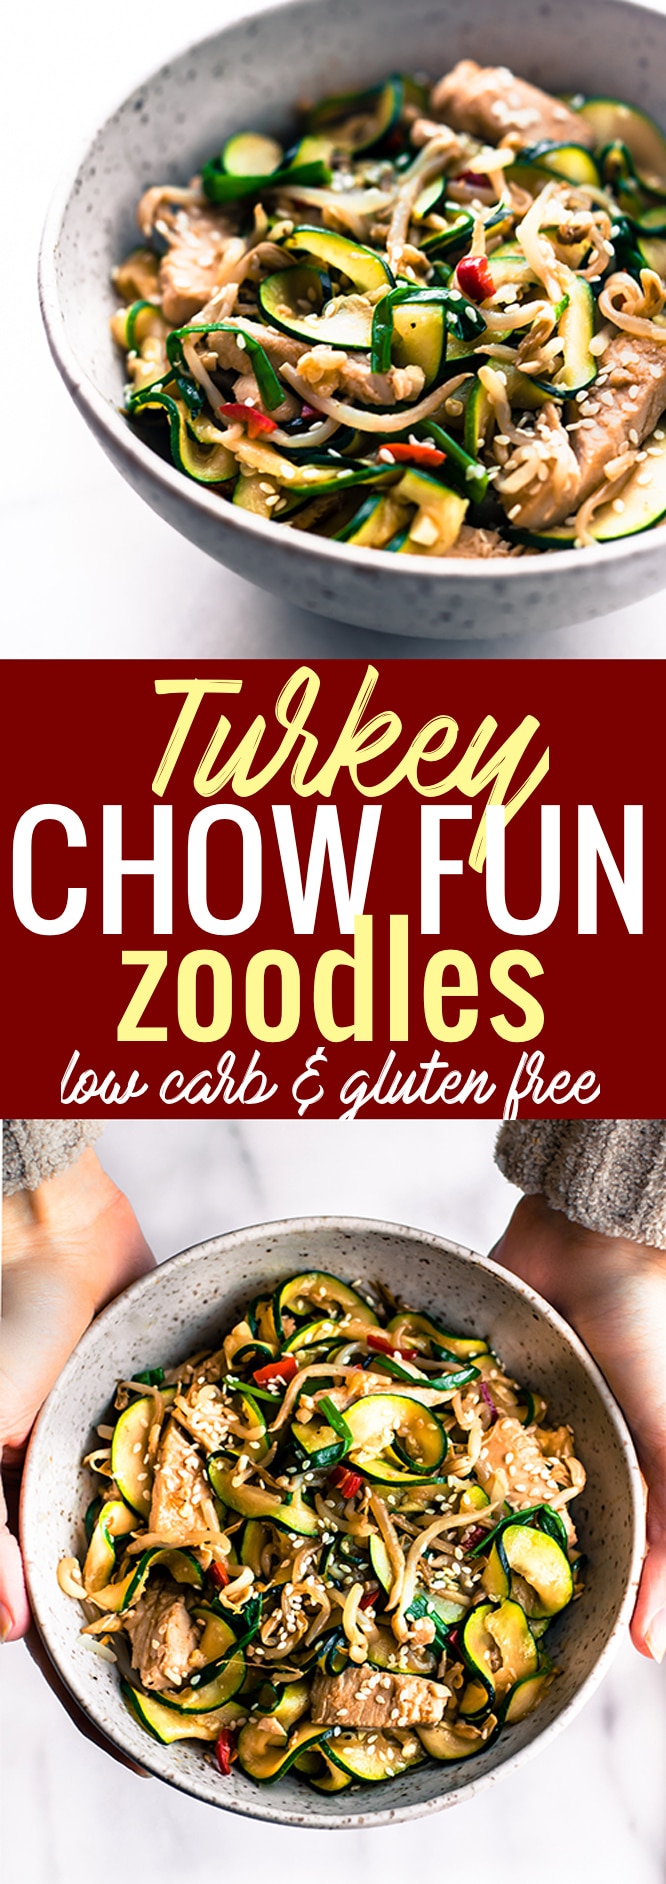 A Turkey Chow Fun recipe made with tamari zoodles! This spiralized zucchini turkey chow fun stir fry is light, naturally gluten free, and lower in carbs. A chow fun recipe that puts those leftover veggies and Turkey to use. Quick to make and delicious! www.cottercrunch.com @cottercrunch